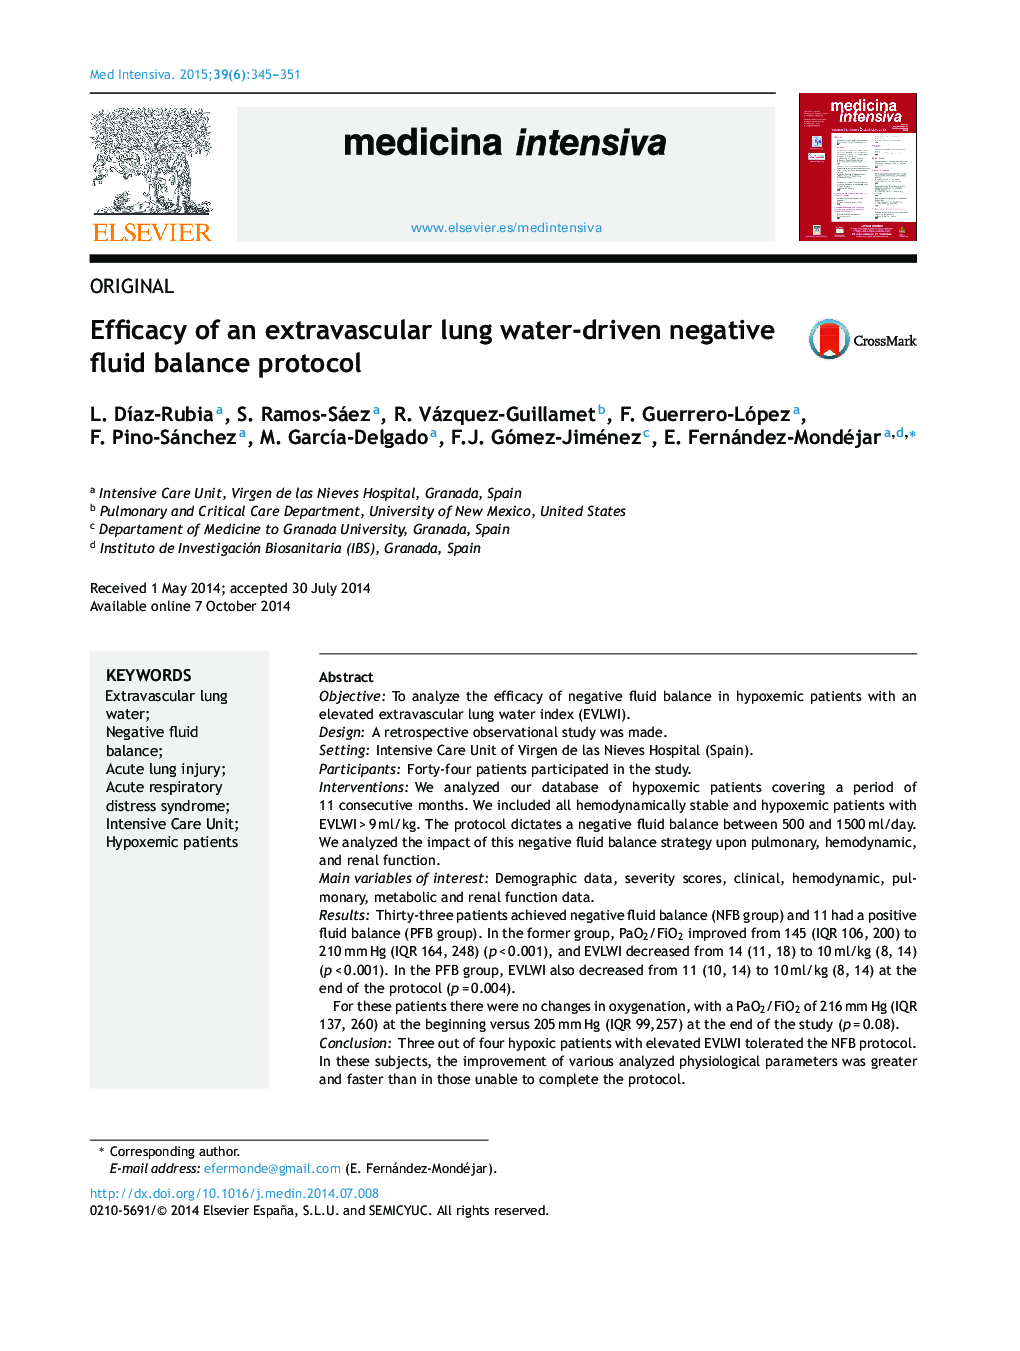 Efficacy of an extravascular lung water-driven negative fluid balance protocol